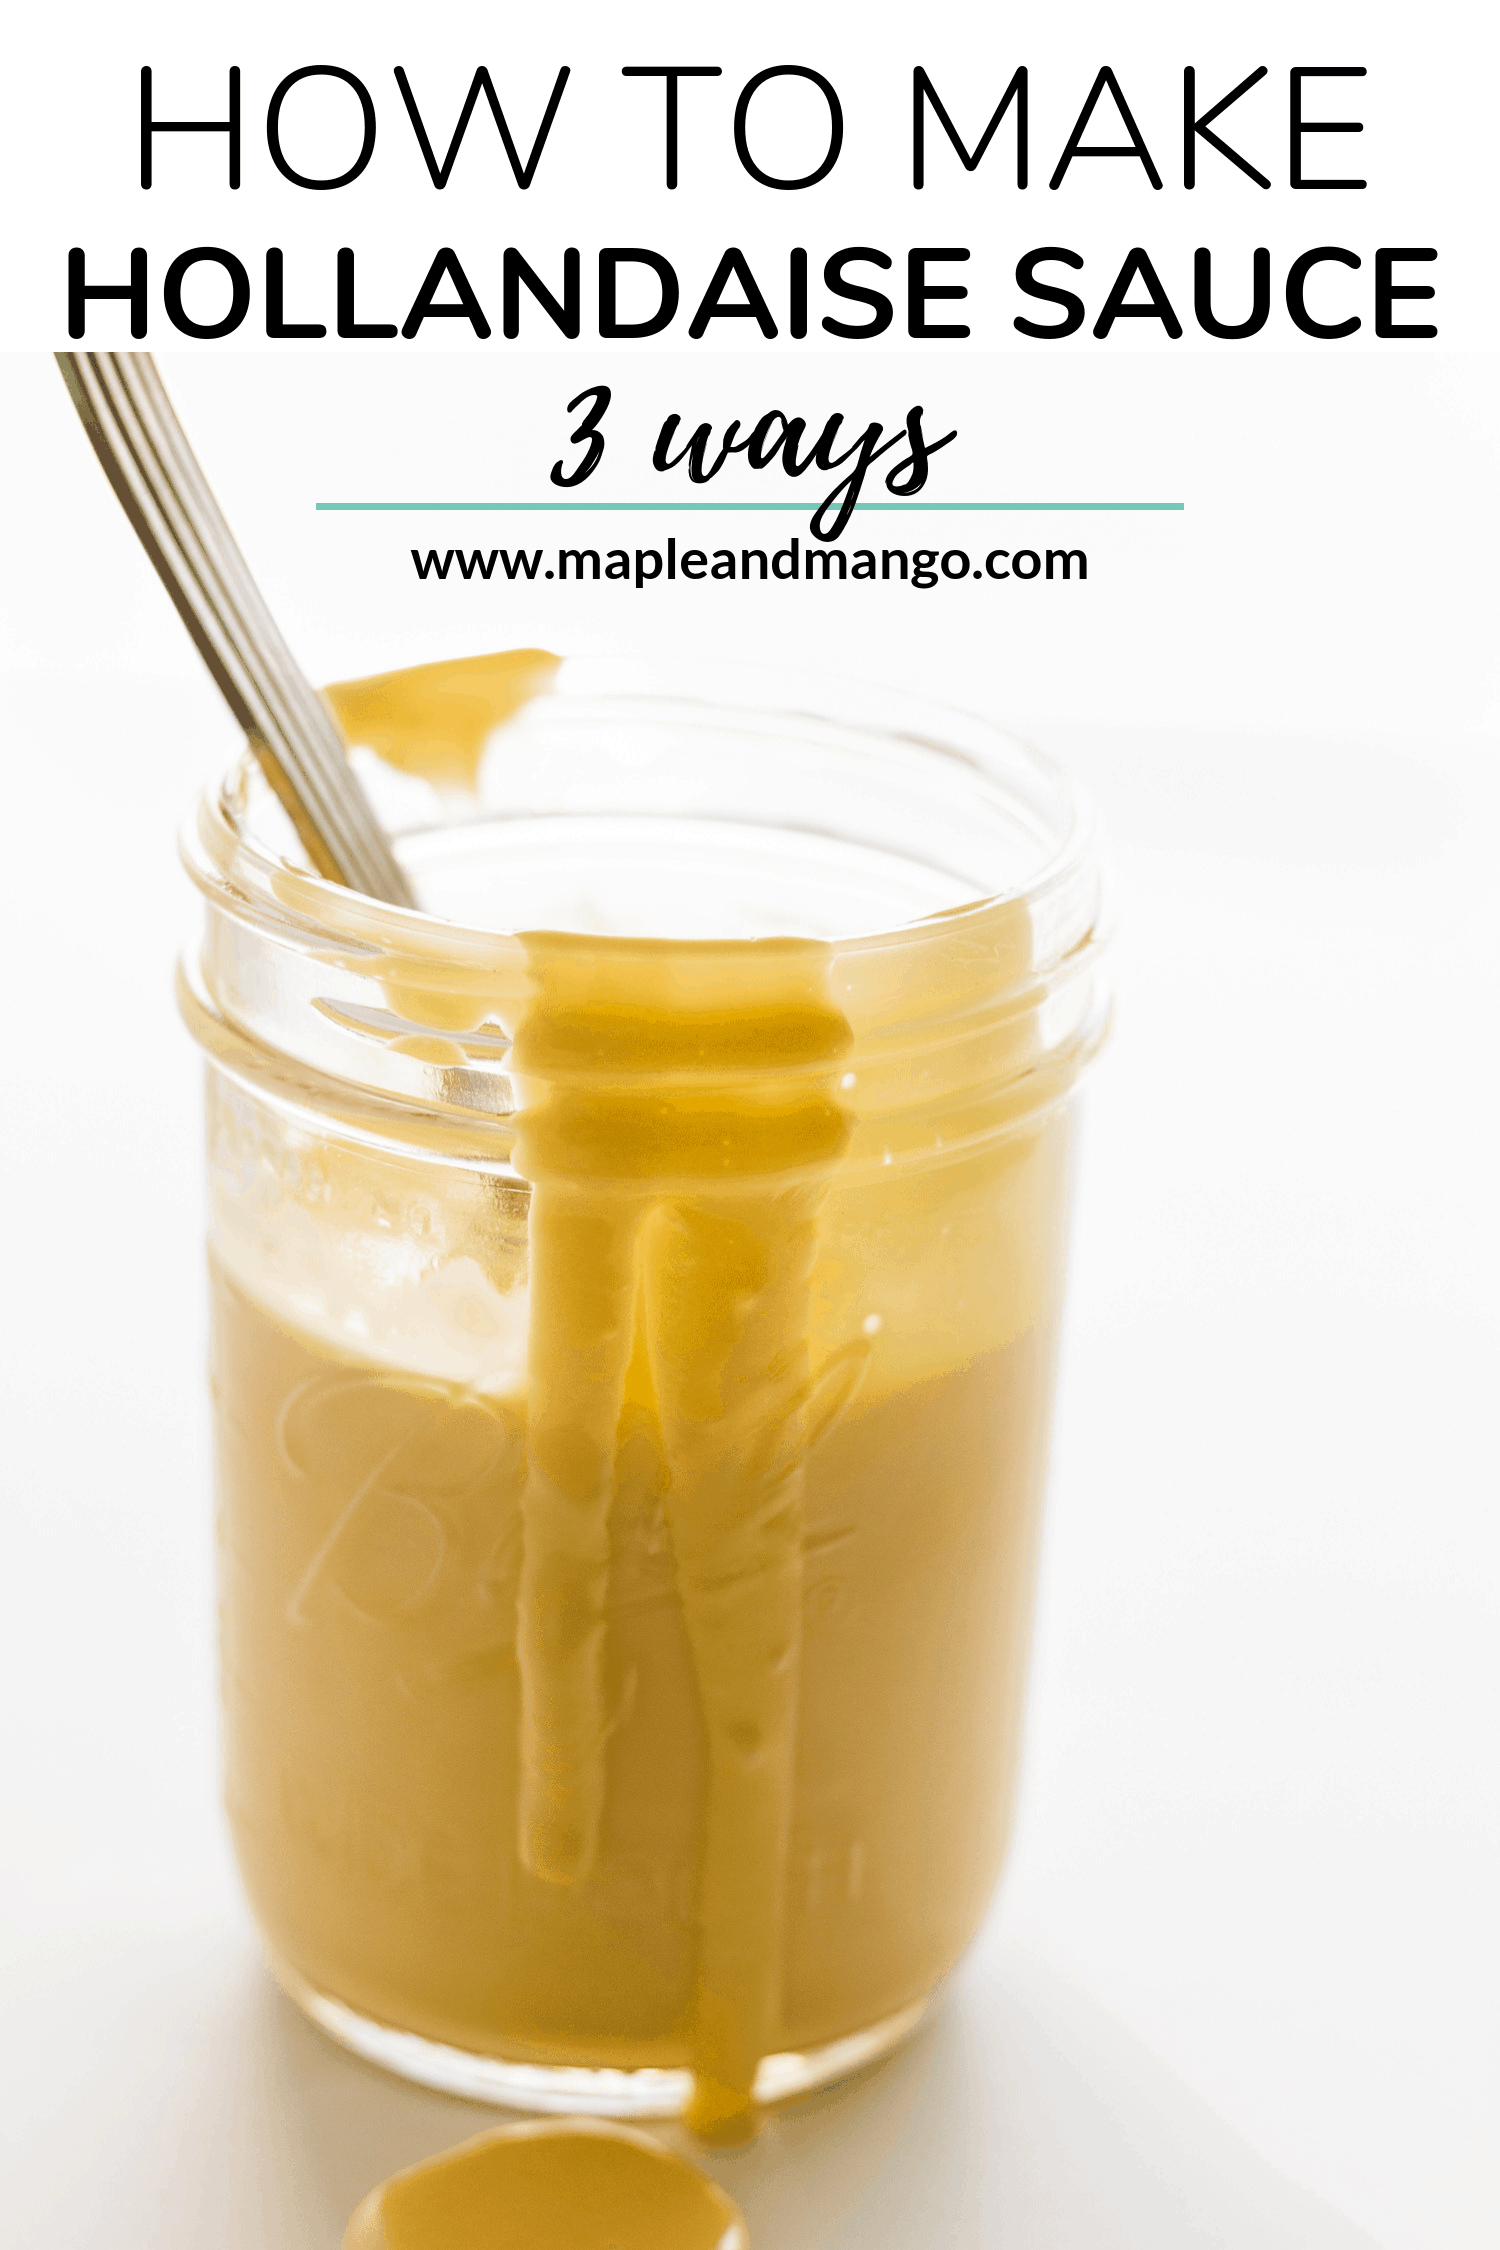 Mason jar filled with hollandaise sauce and a spoon sitting inside and text overlay "How To Make Hollandaise Sauce 3 ways".